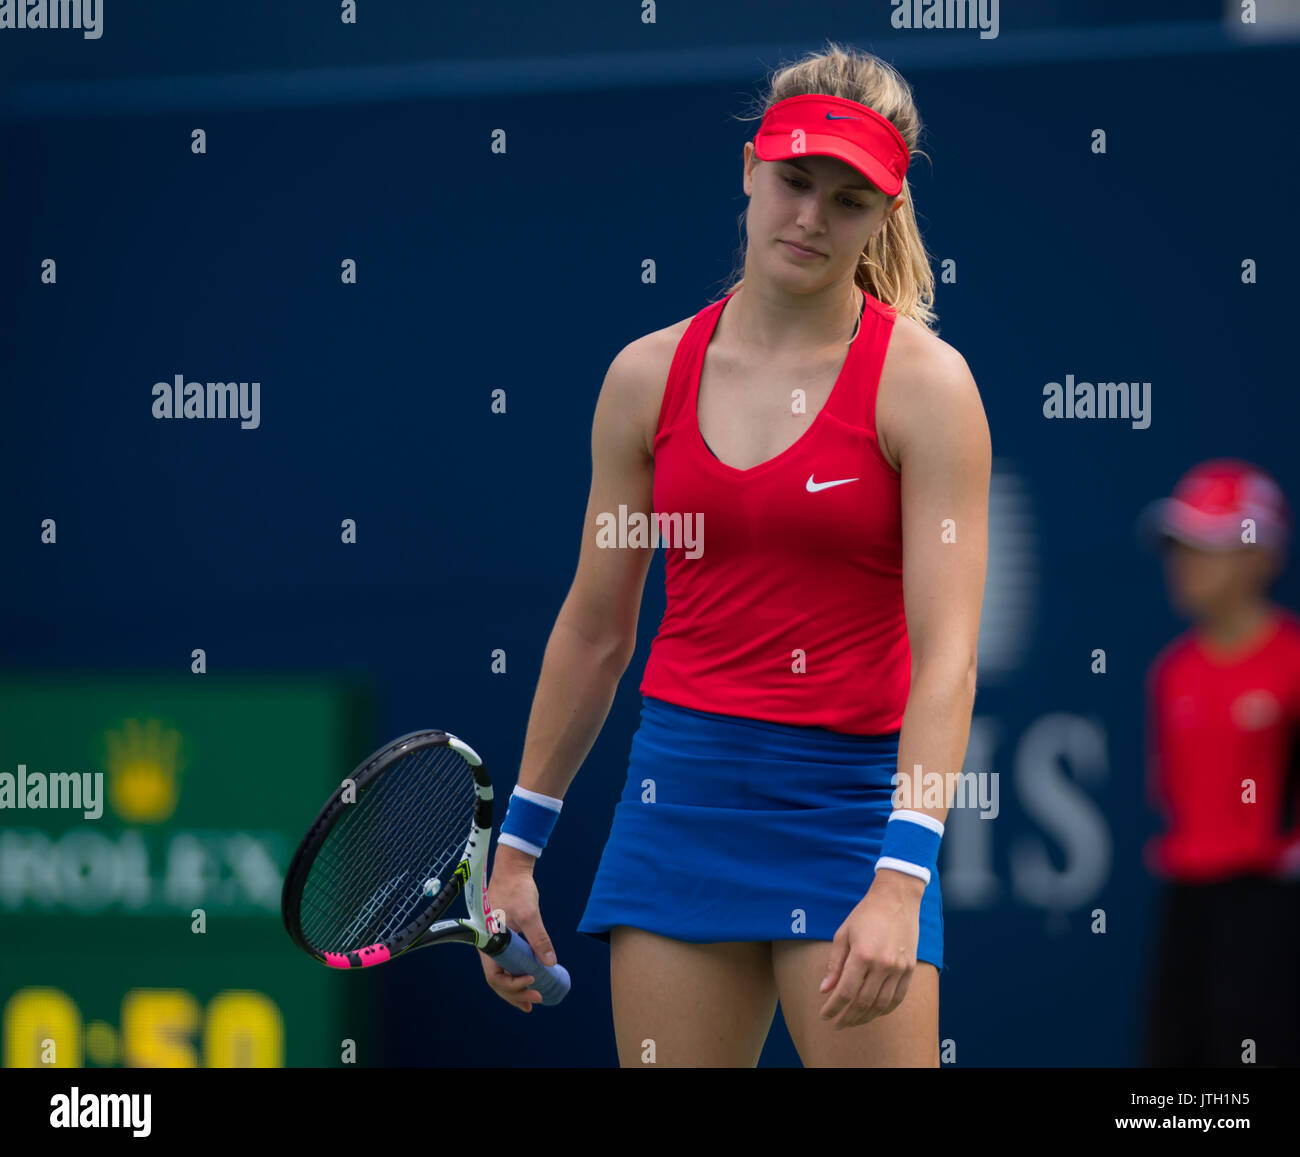 Toronto, Canada. 8 August, 2017. Eugenie Bouchard of Canada at the 2017  Rogers Cup WTA Premier 5 tennis tournament © Jimmie48 Photography/Alamy  Live News Stock Photo - Alamy